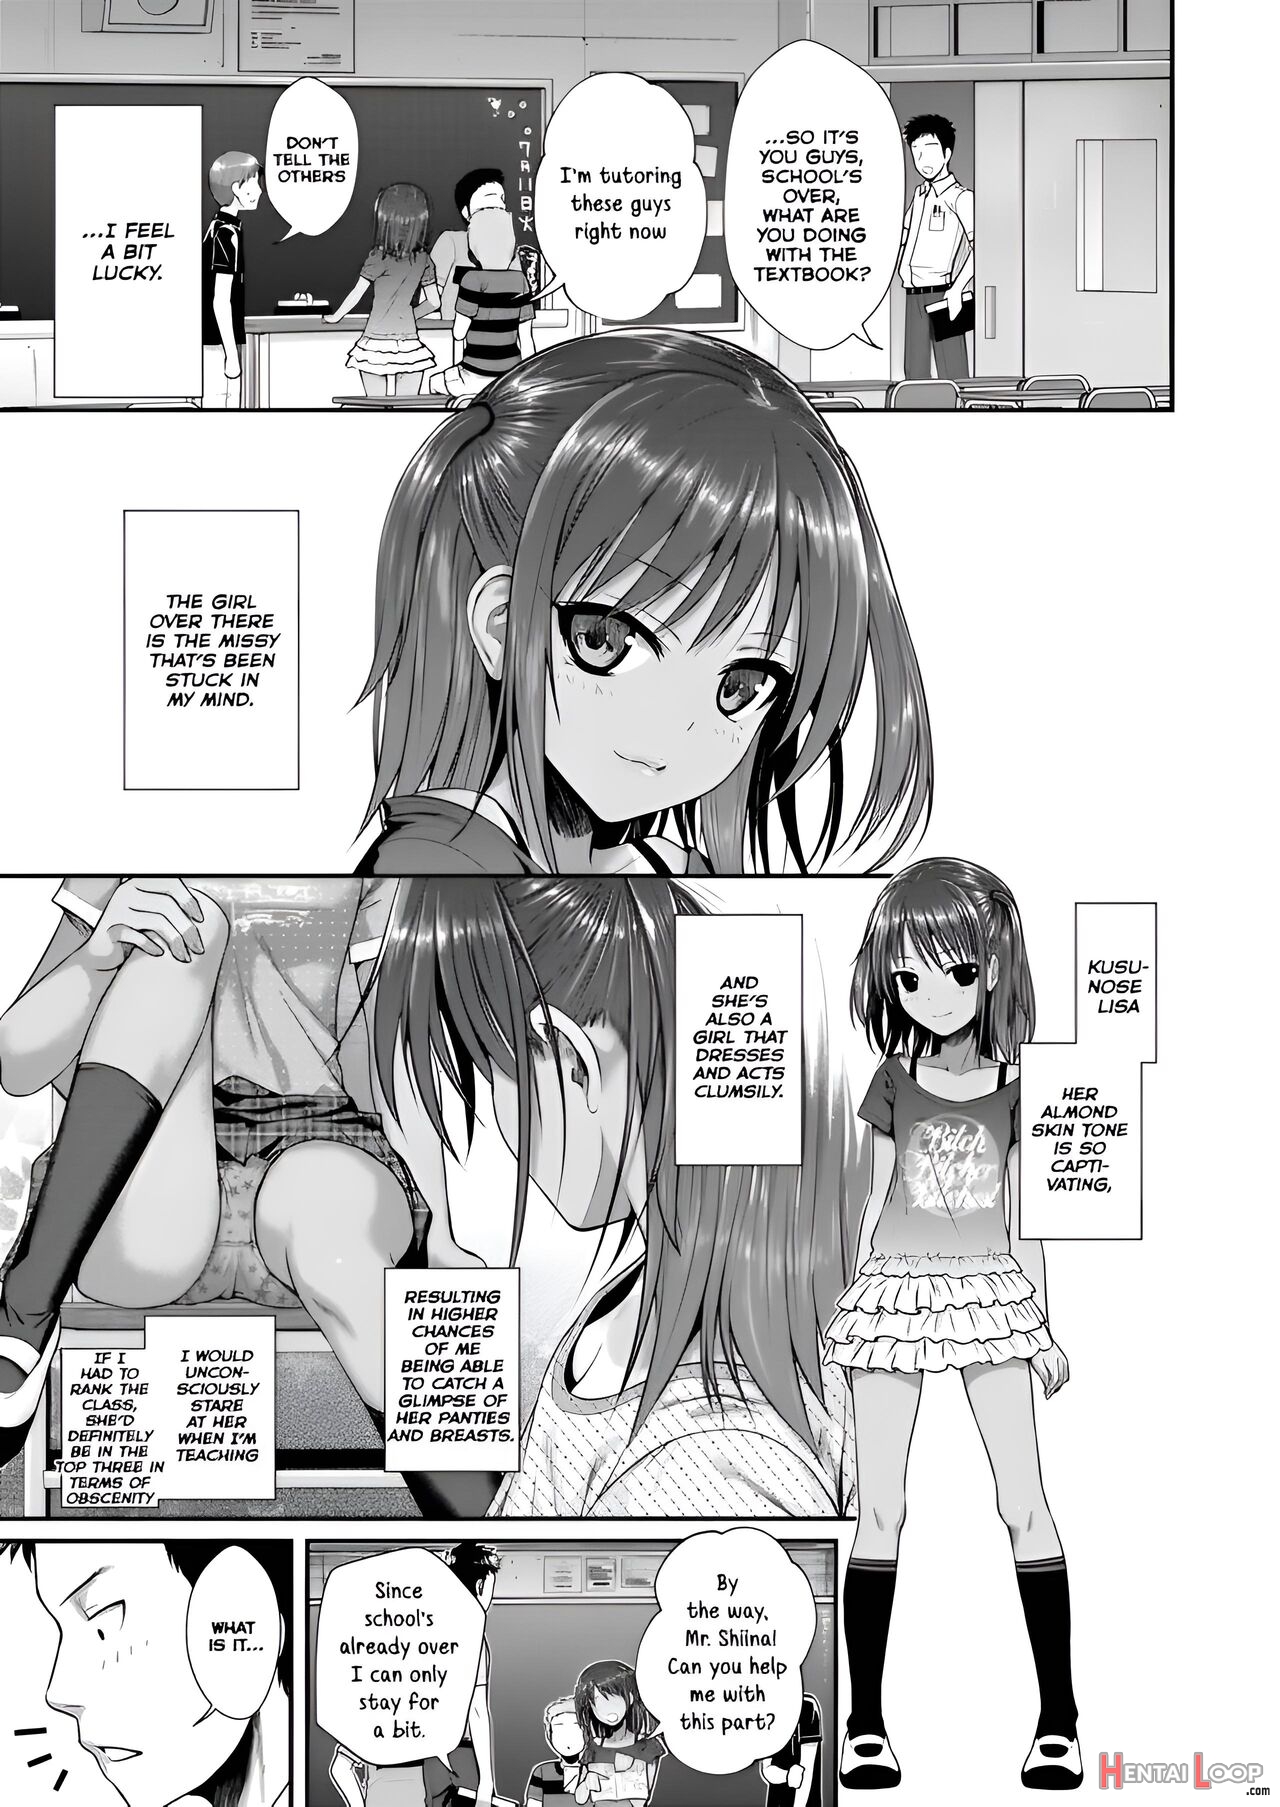 Together With Everyone After School 4k Edit page 3